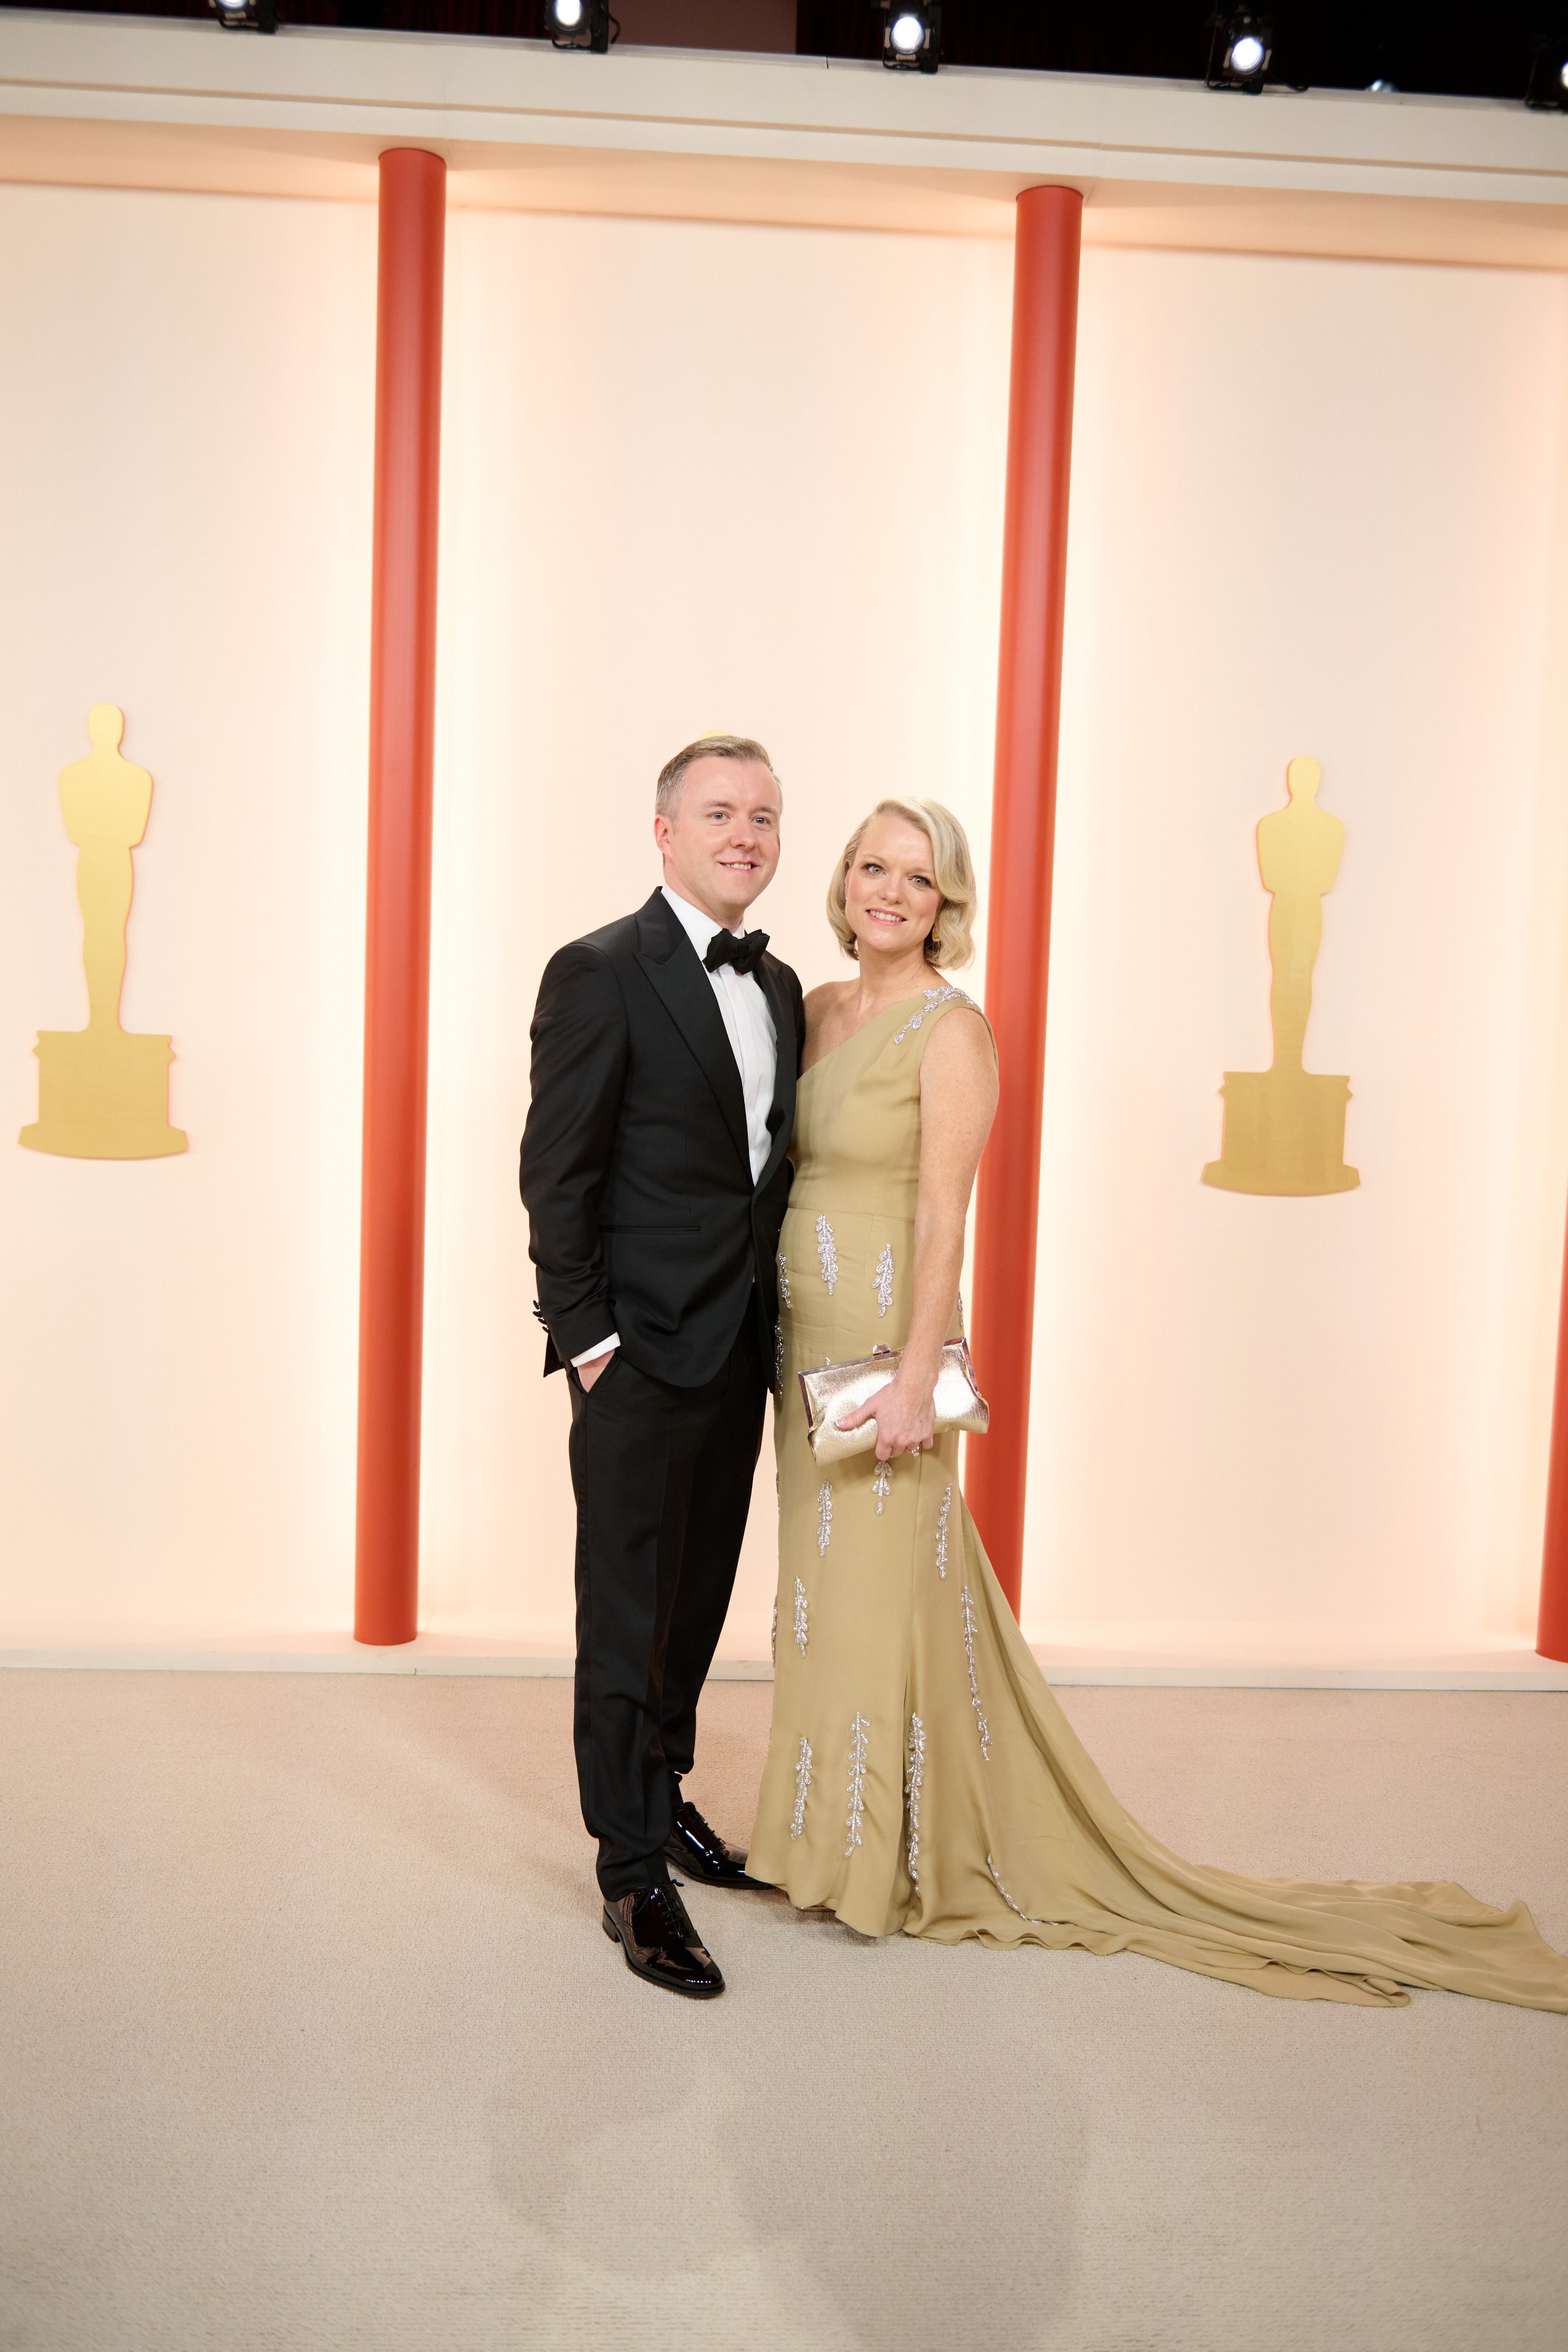 Oscar® nominee Colm Bairéad and guest arrive on the red carpet of the 95th Oscars